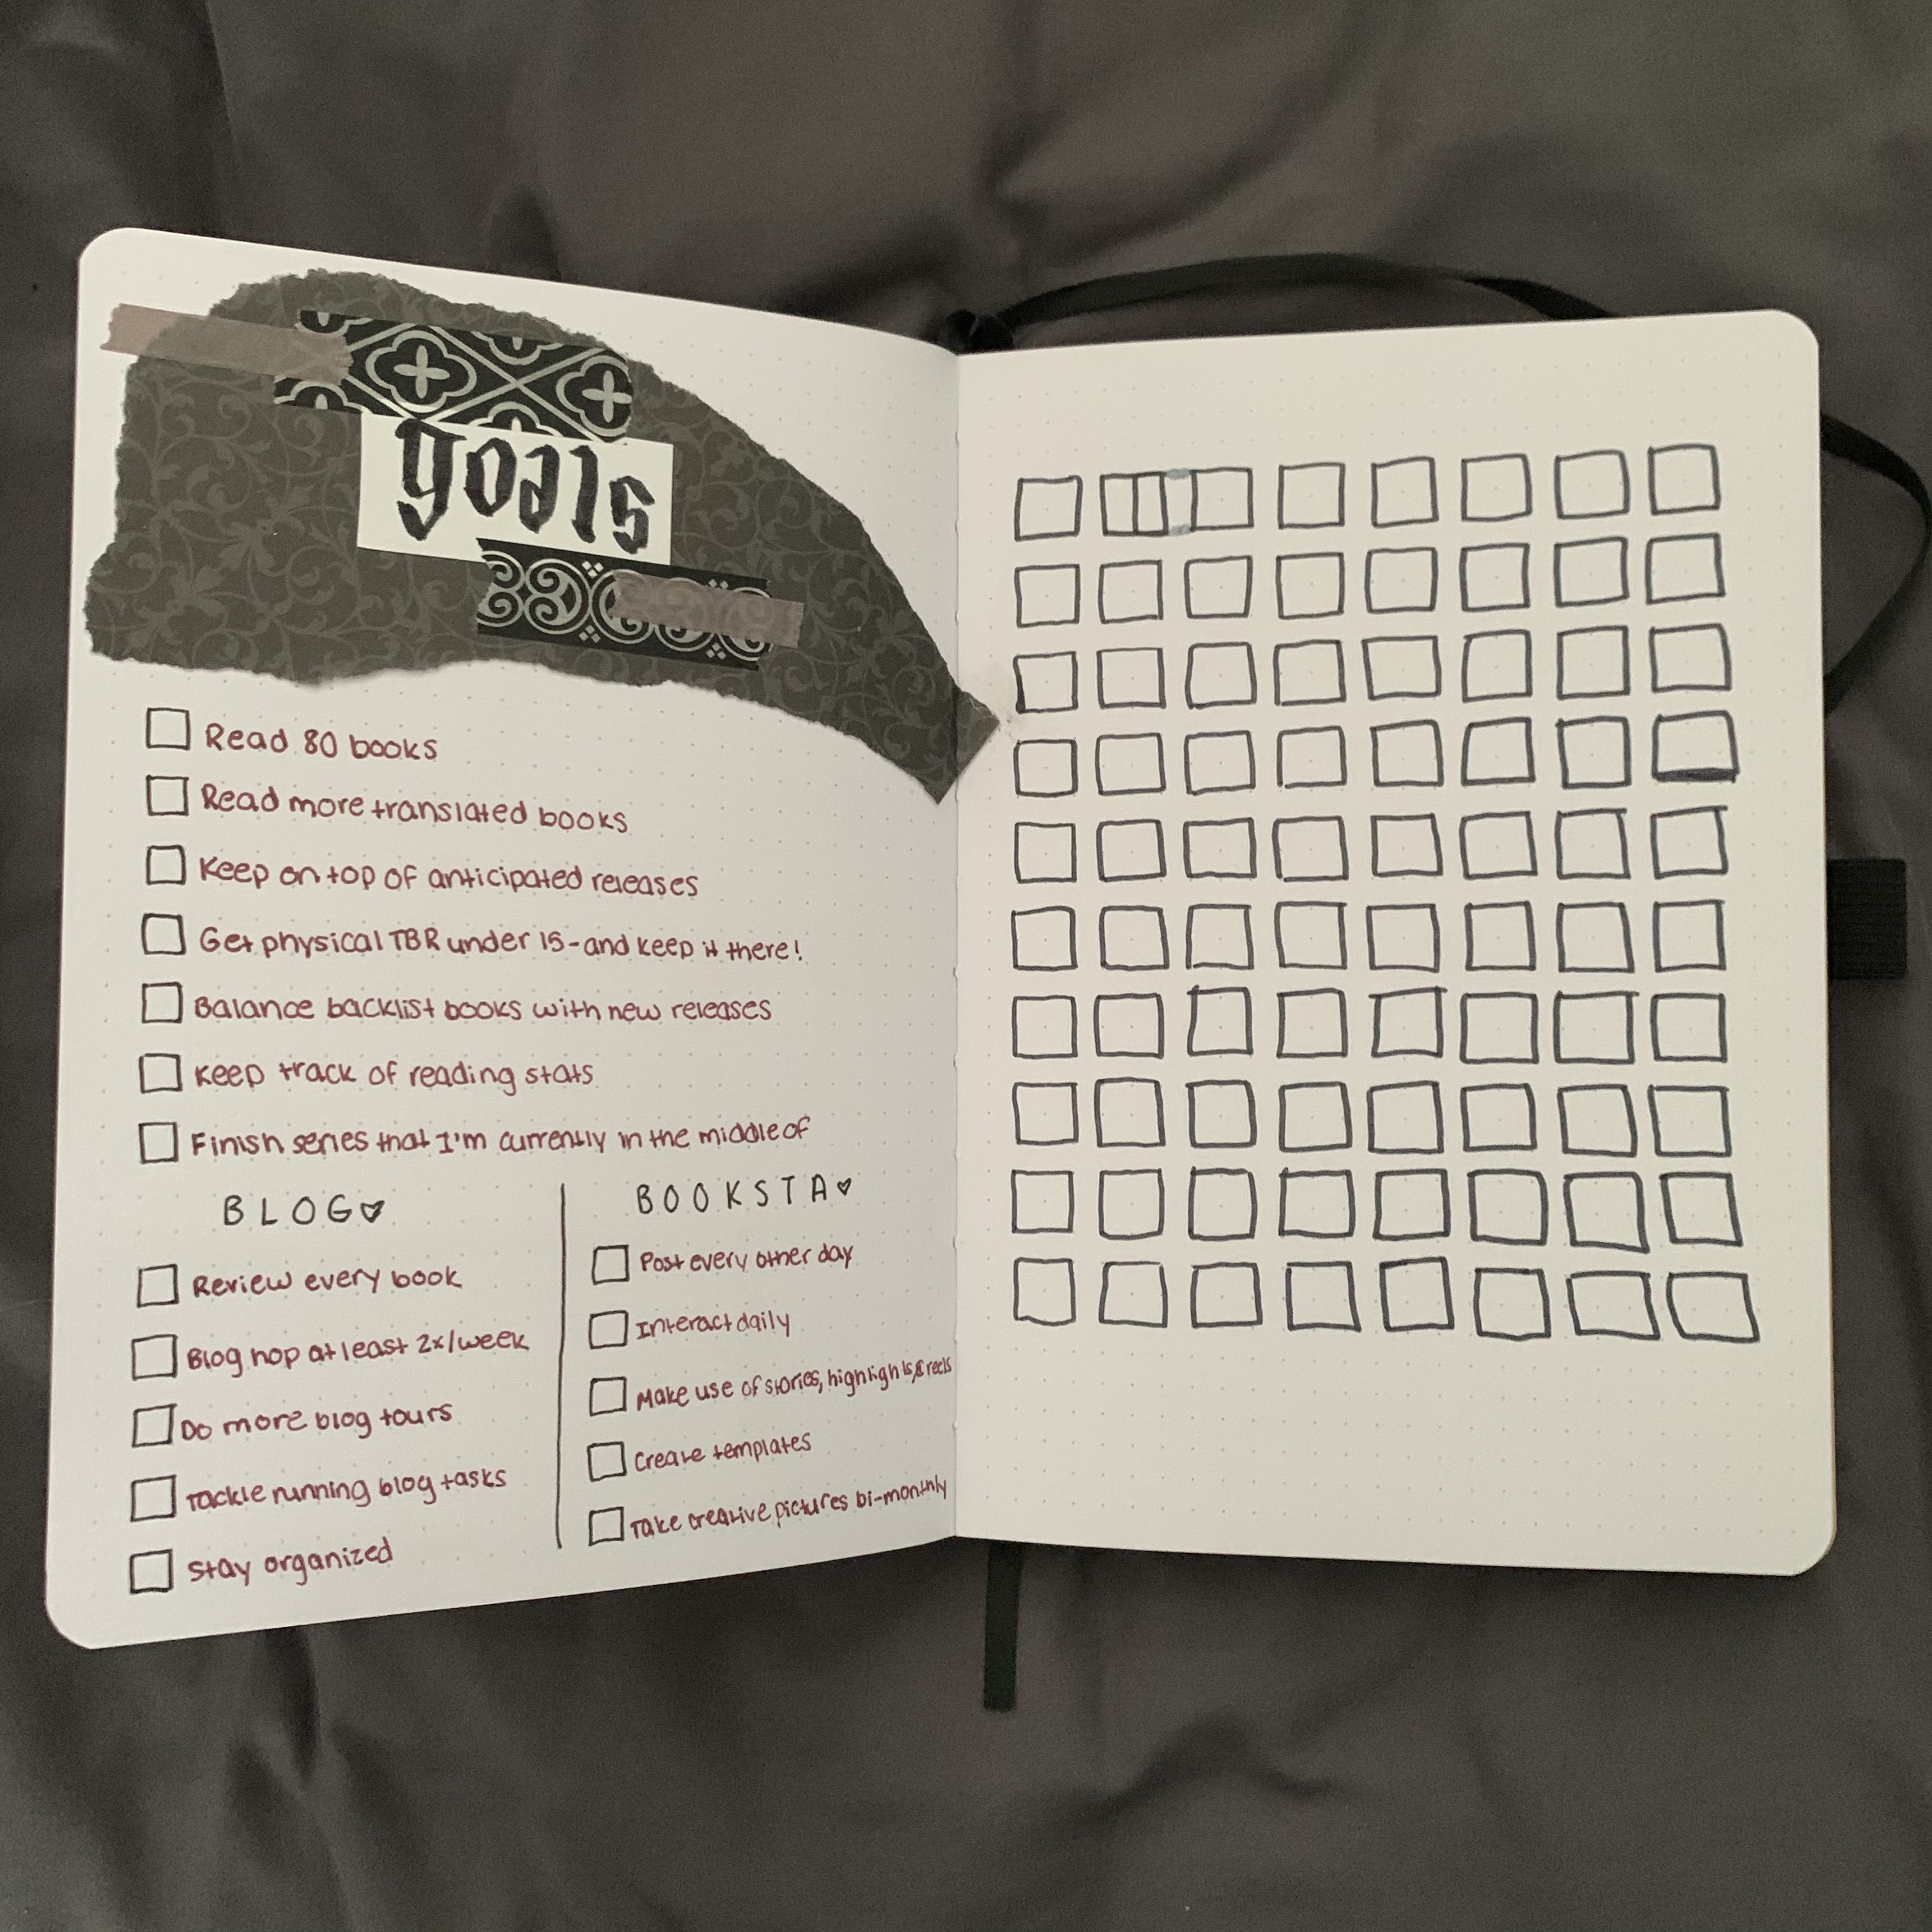 2021 Reading Journal Spread of a List of Bookish Goals and 80 Boxes to Be Filled in for Each Book Read